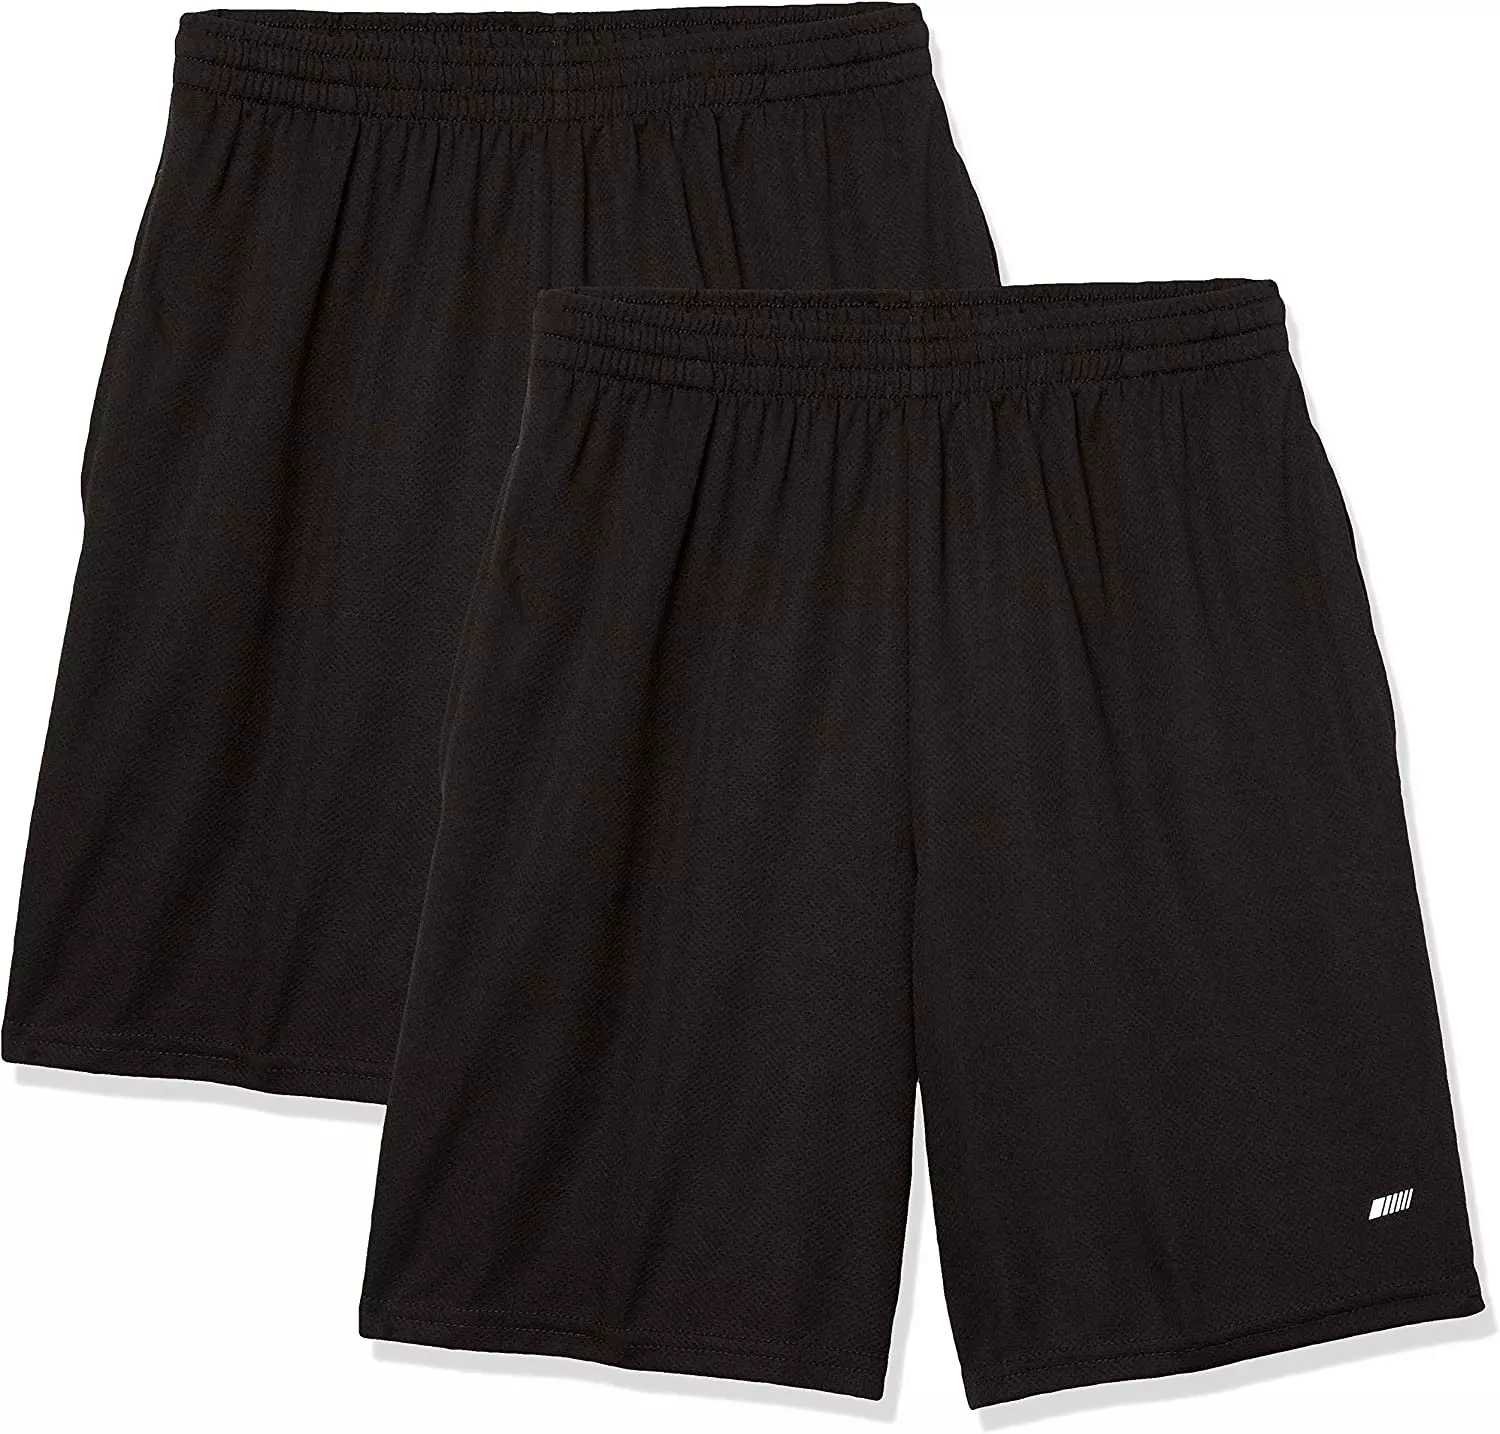 Best Loose-Fit: Amazon Essentials Men’s 2-Pack Loose-Fit Performance Shorts